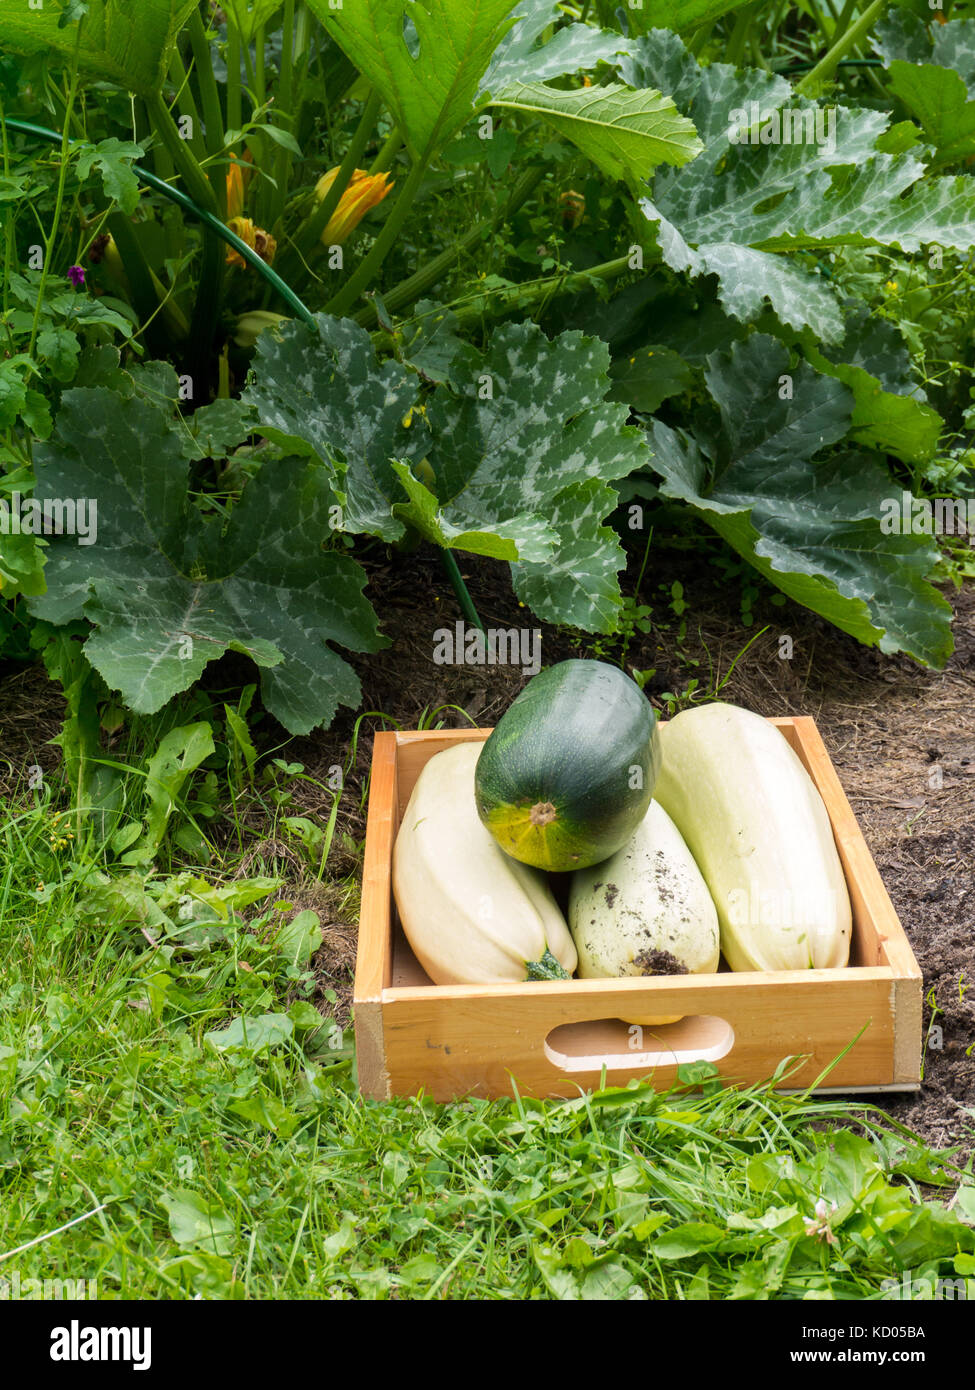 Harvesting zucchini in the organic vegetable garden. Green and white marrow squash in the wooden box. Flowering zucchini plants. Stock Photo